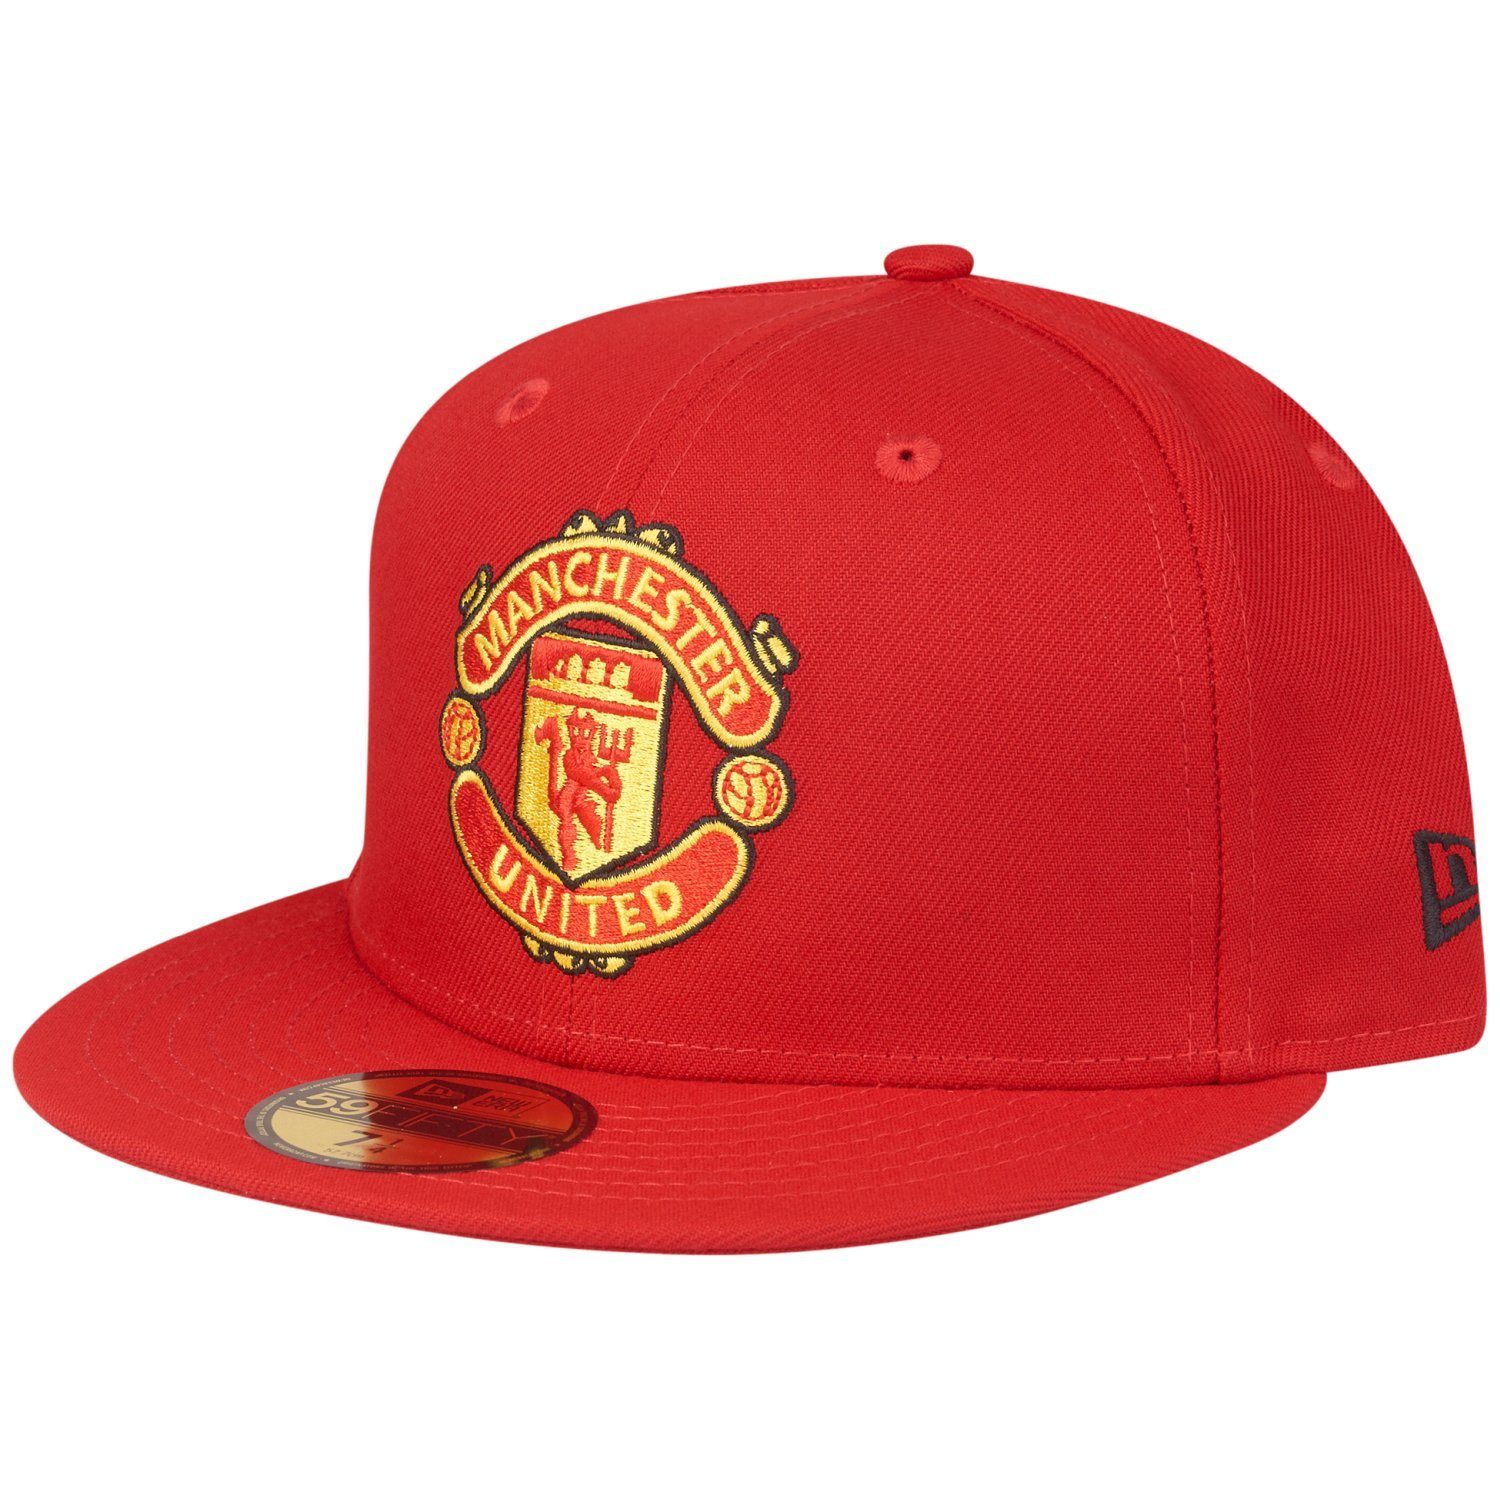 New Era Fitted Cap 59Fifty Manchester United F.C. | Fitted Caps